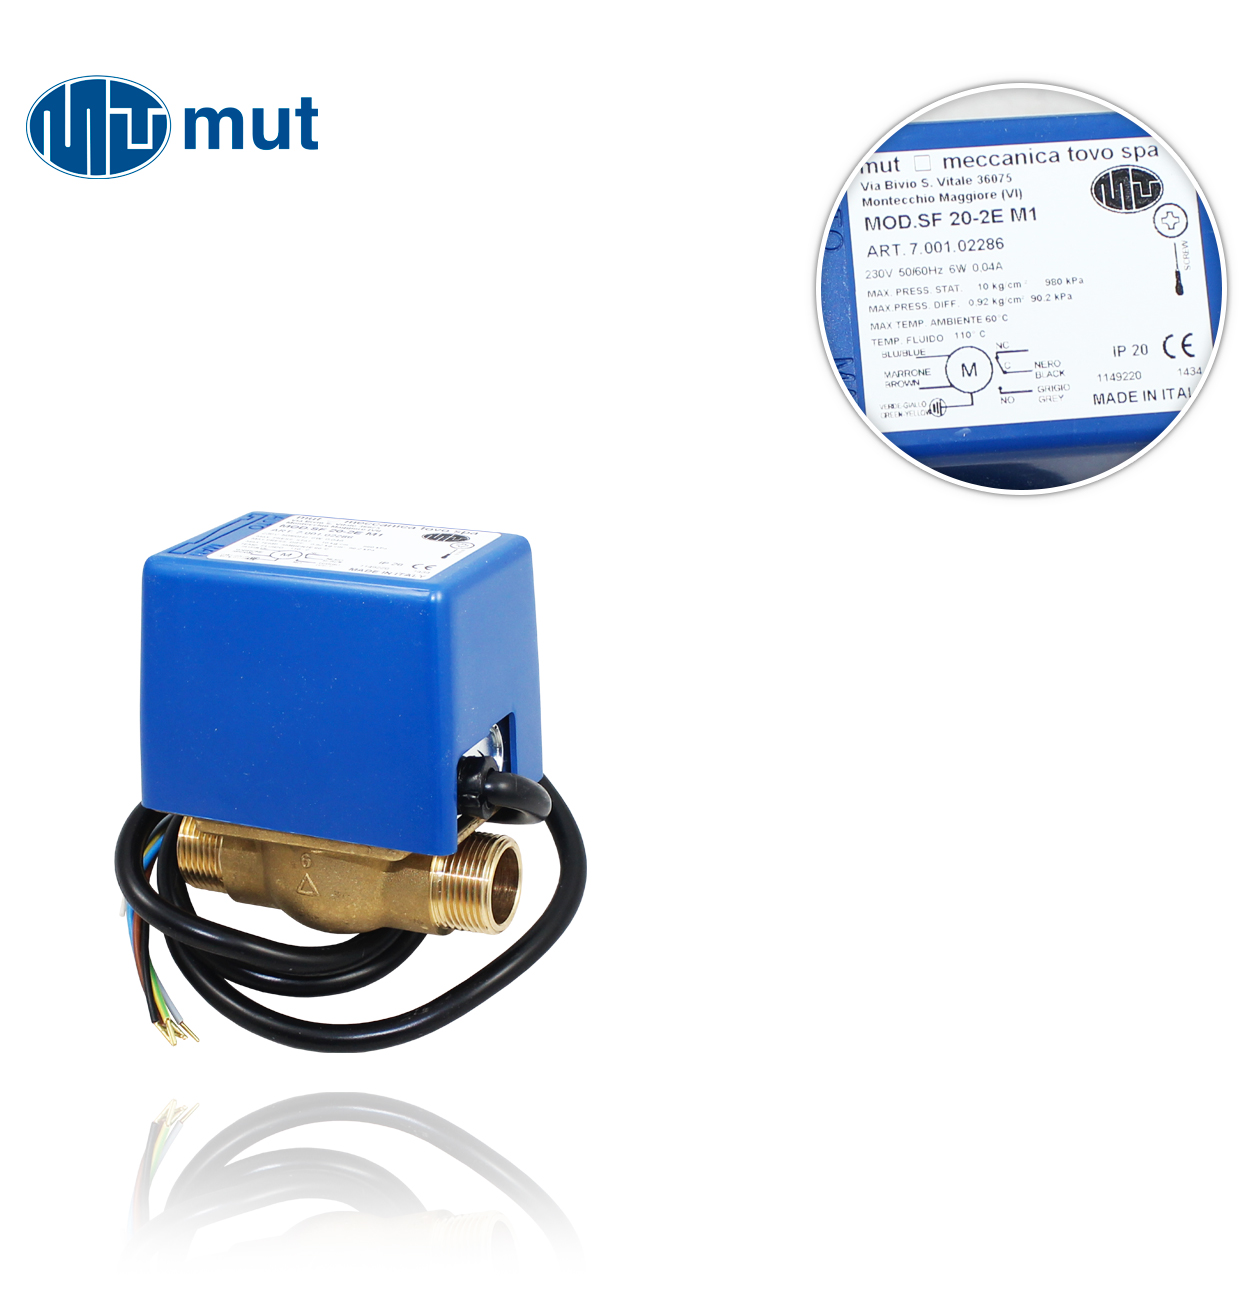 SF 20-2 E M1 MM R3/4" 2-way MUT ZONE with 230V microswitch